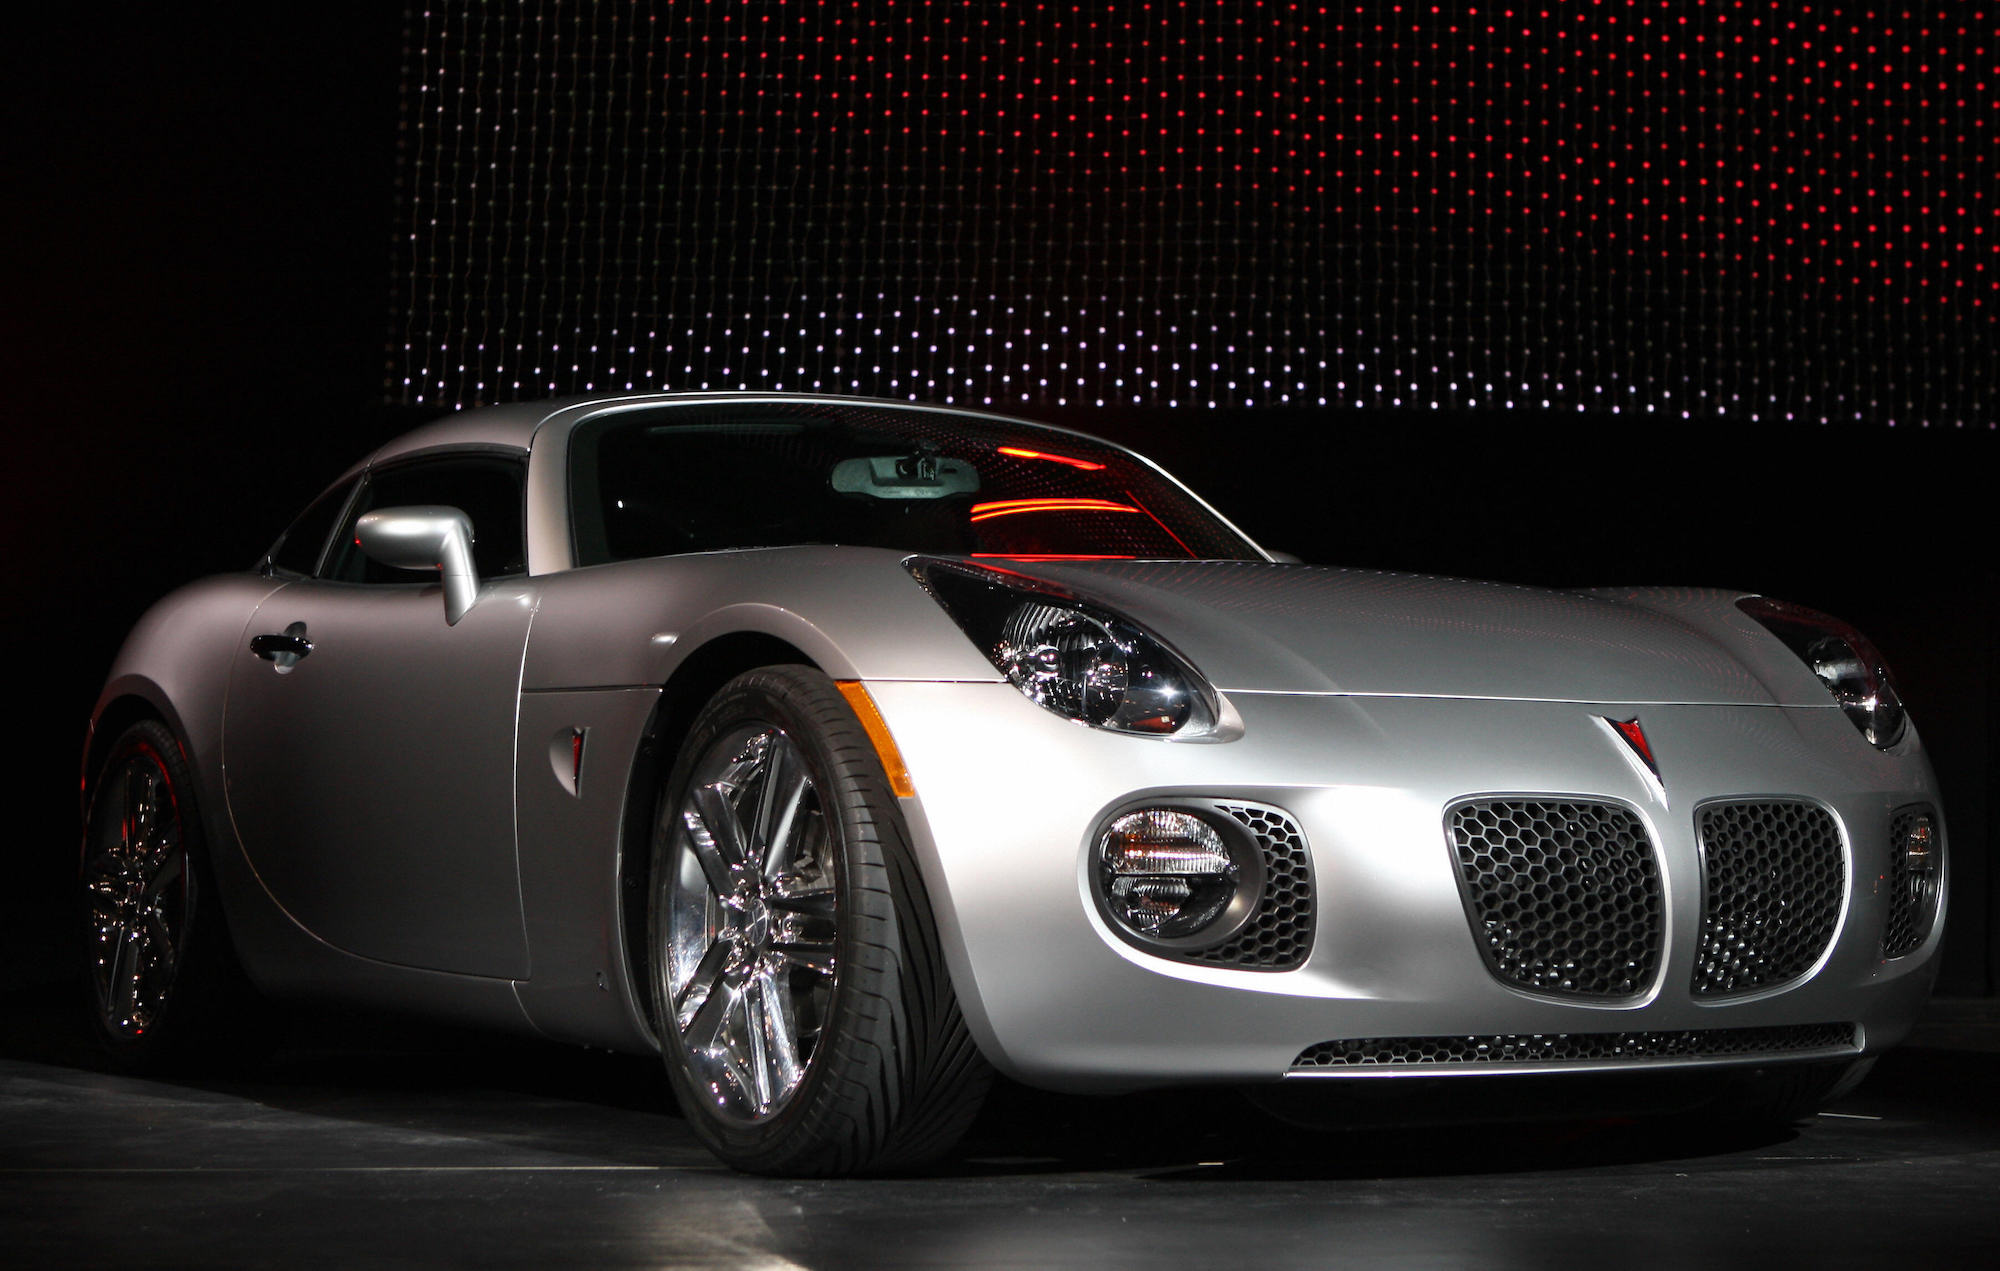 A silver 2009 Pontiac Solstice Coupe is unveiled on March 19, 2008, at the New York International Auto Show.